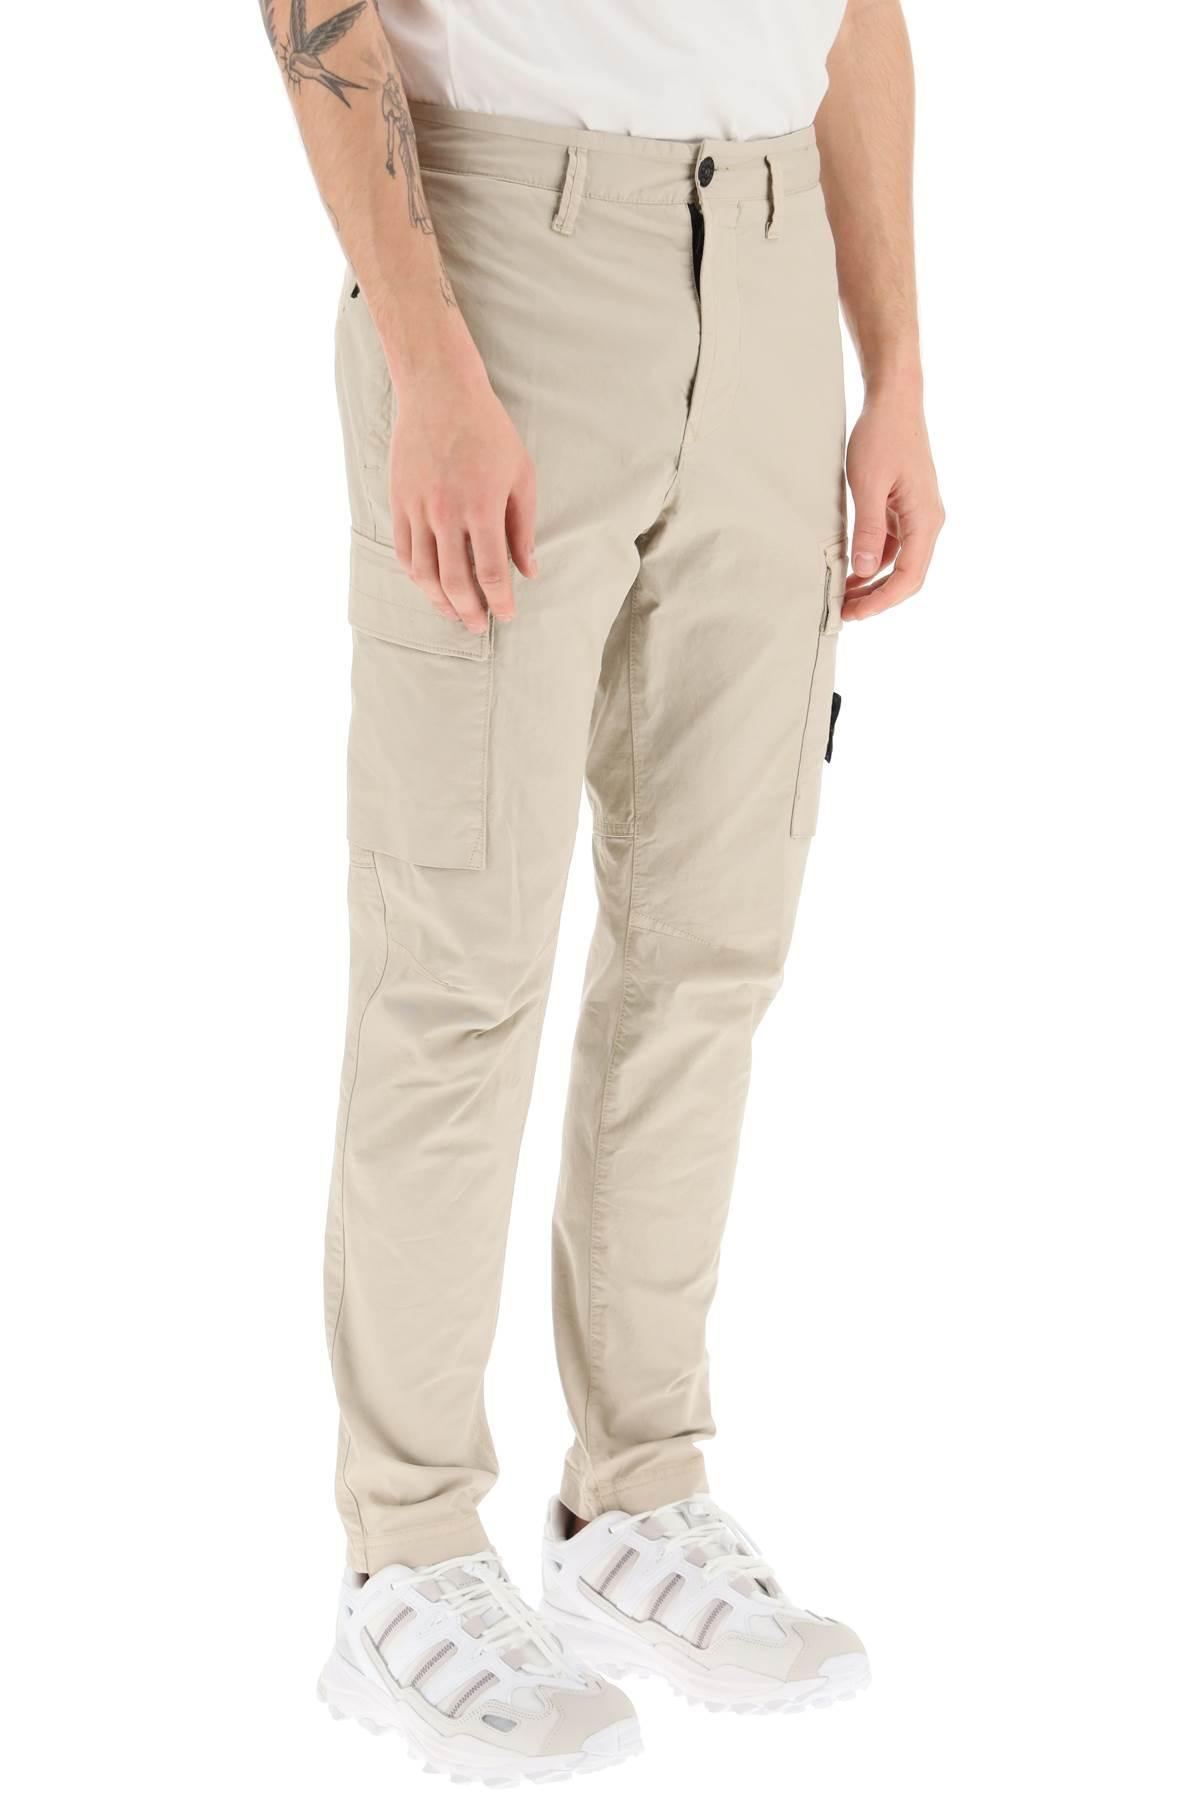 Stone Island Cargo Pants in Natural for Men | Lyst